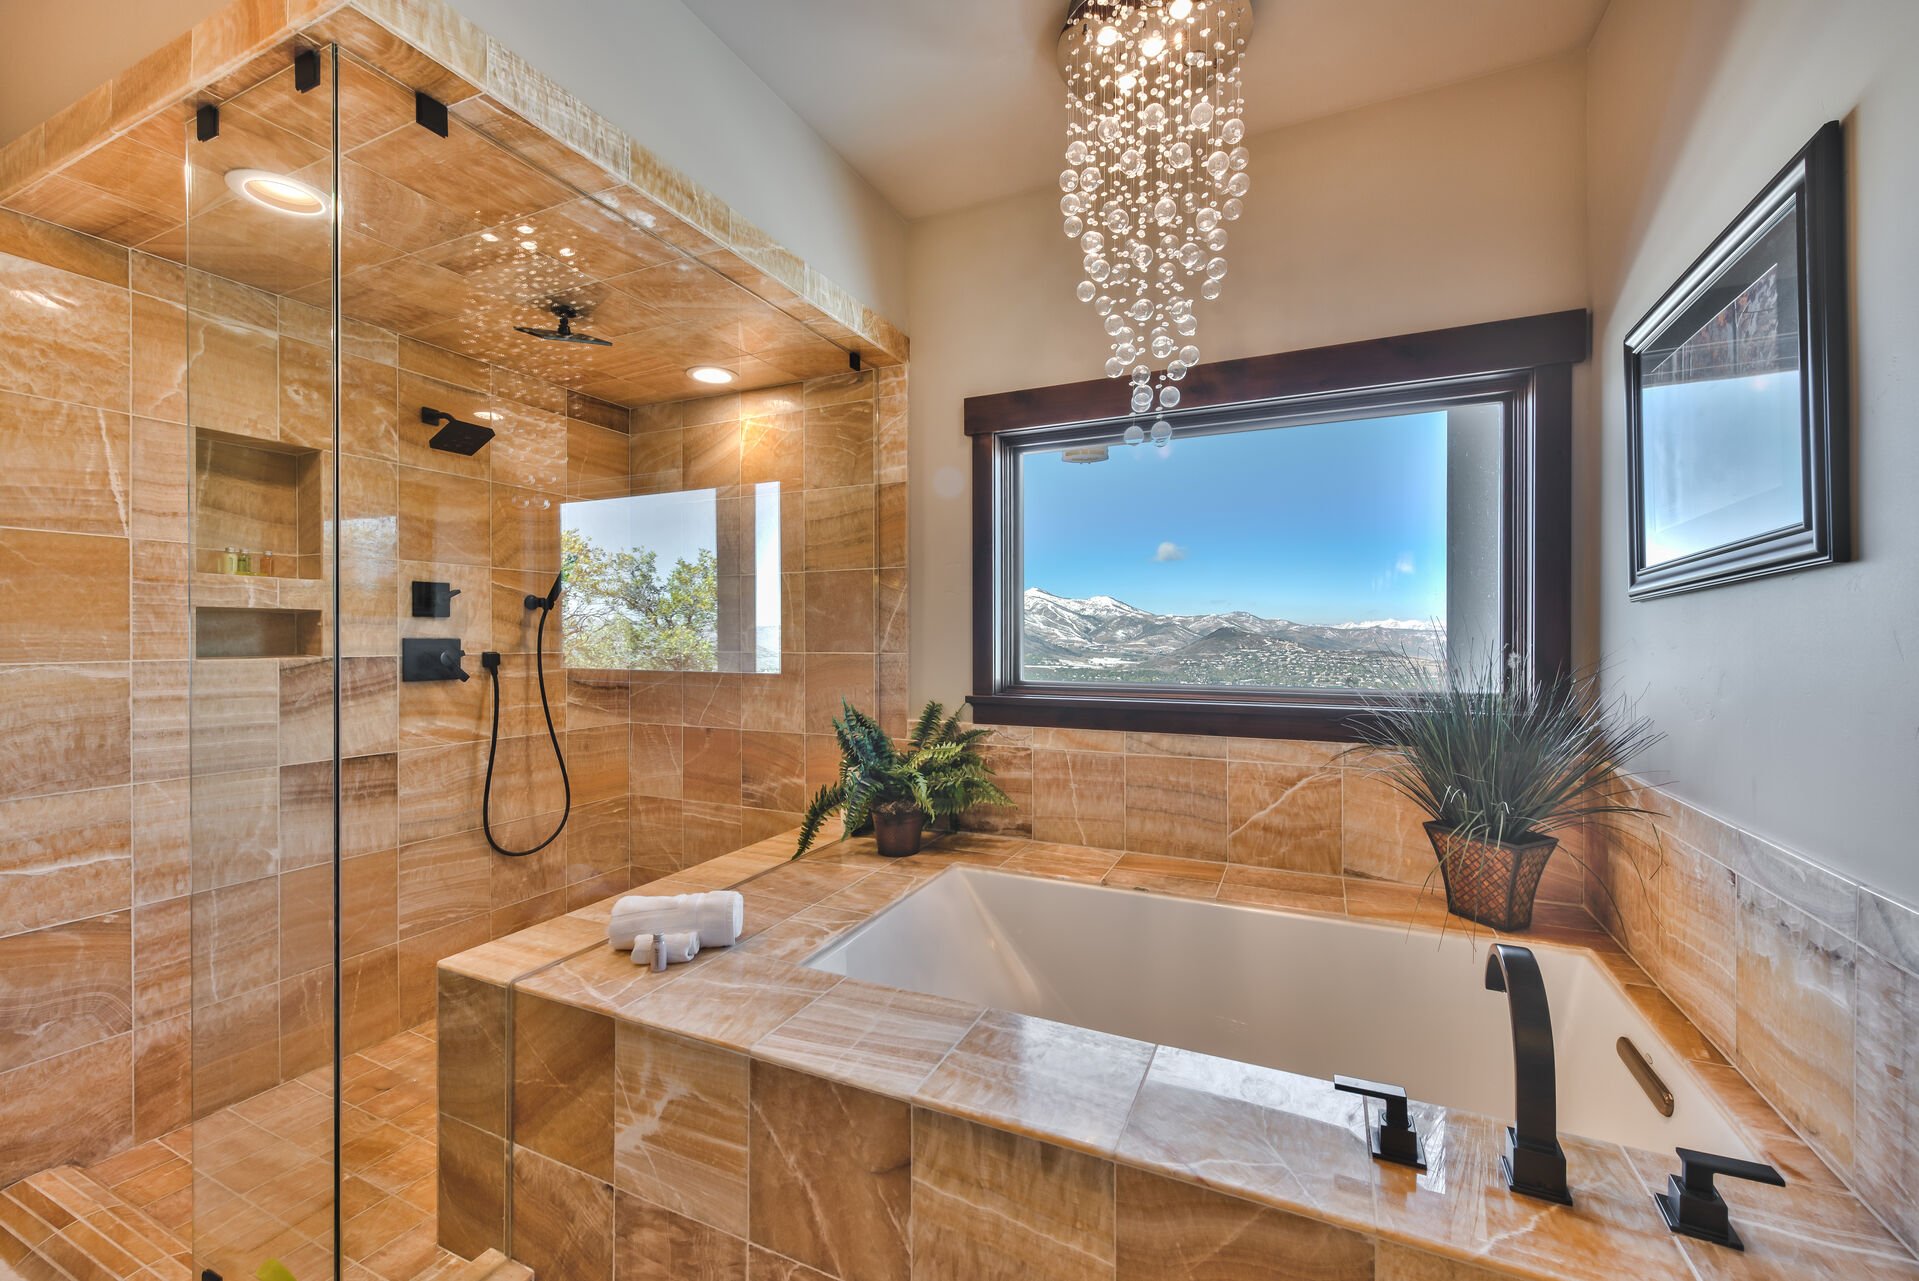 Grand Master Bath with a Soaking Tub and a Large Tile Shower with Triple Shower Heads